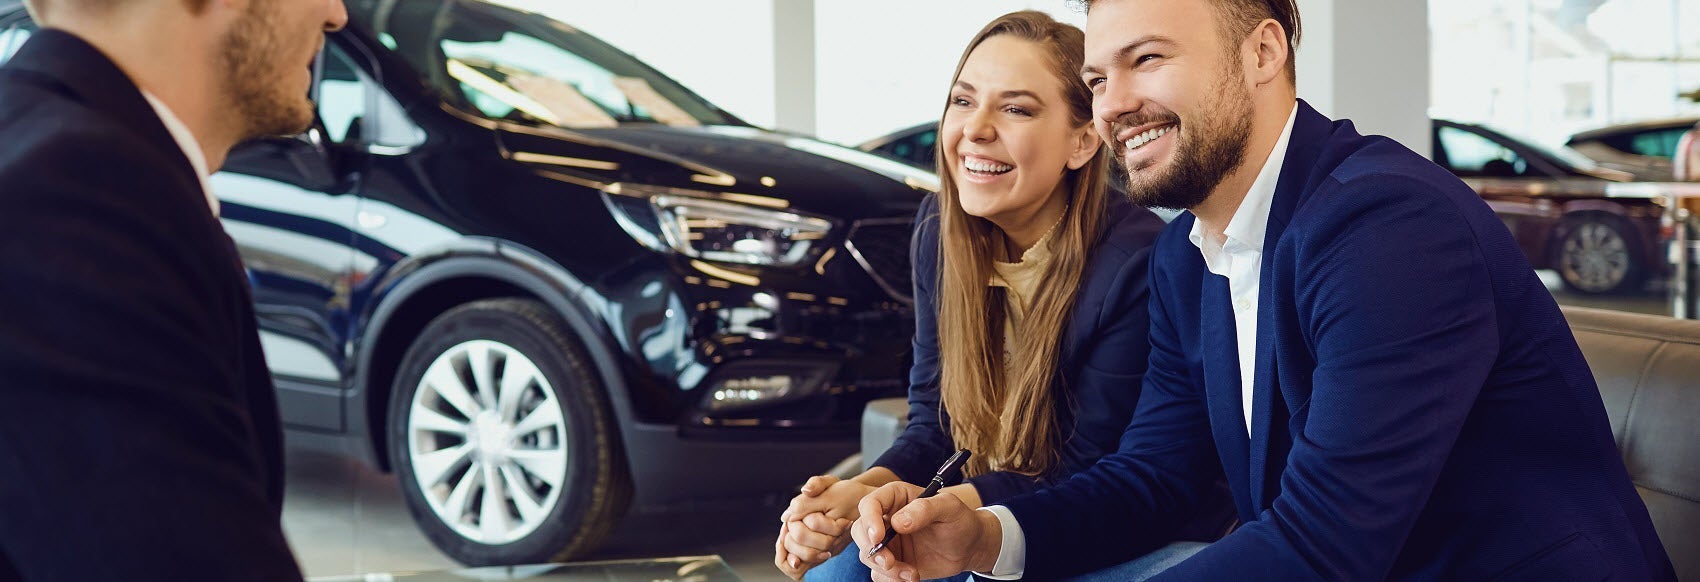 Steps to Selling Your Car to a Dealership Clarkston MI